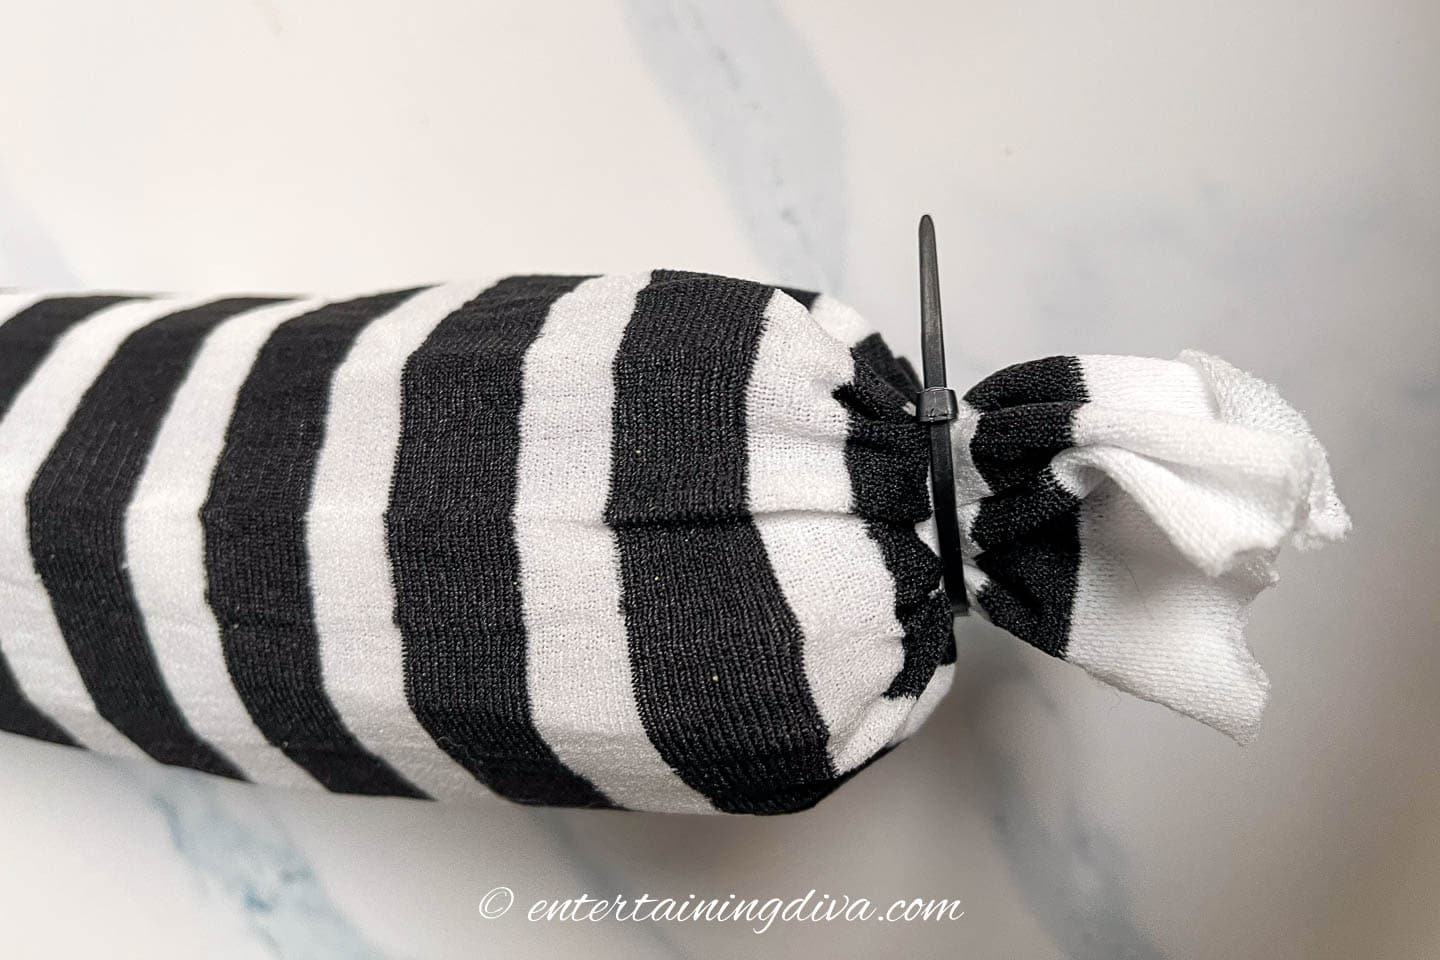 Zip tie around the end of a "sandworm" made from a black and white striped stocking and a pool noodle